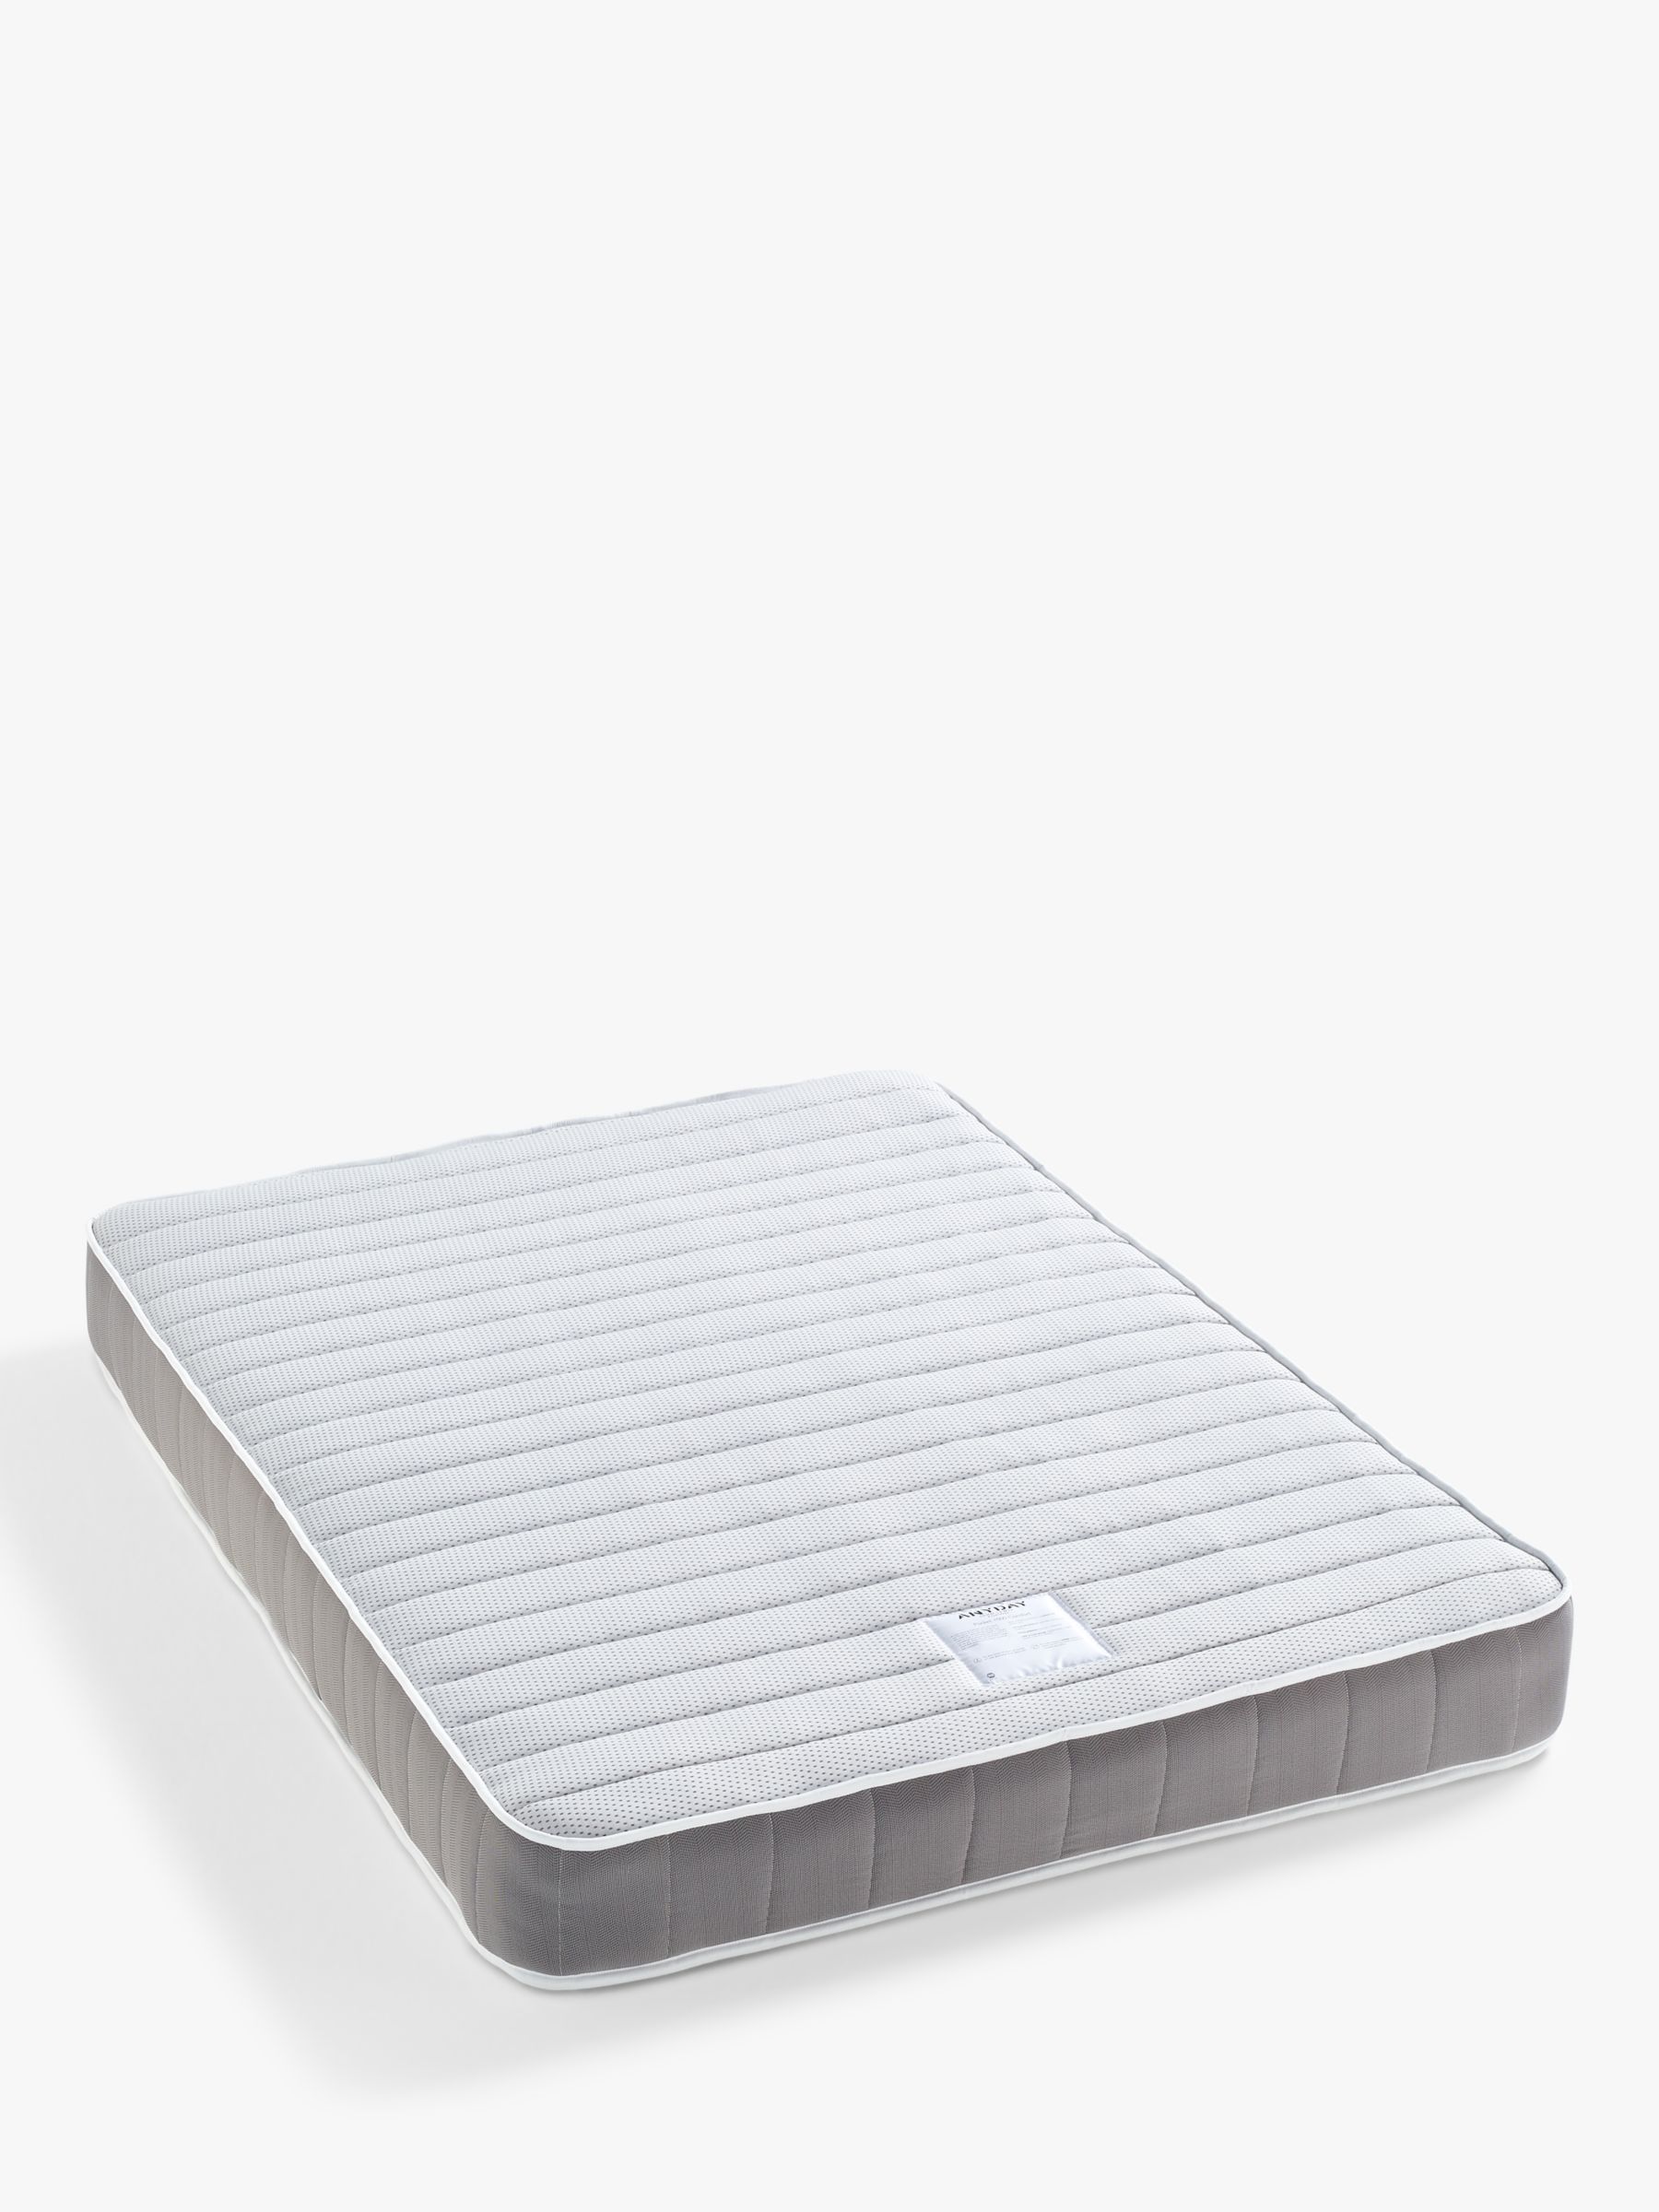 Photo of John lewis anyday pocket 1000 luxury pocket spring rolled mattress medium tension double